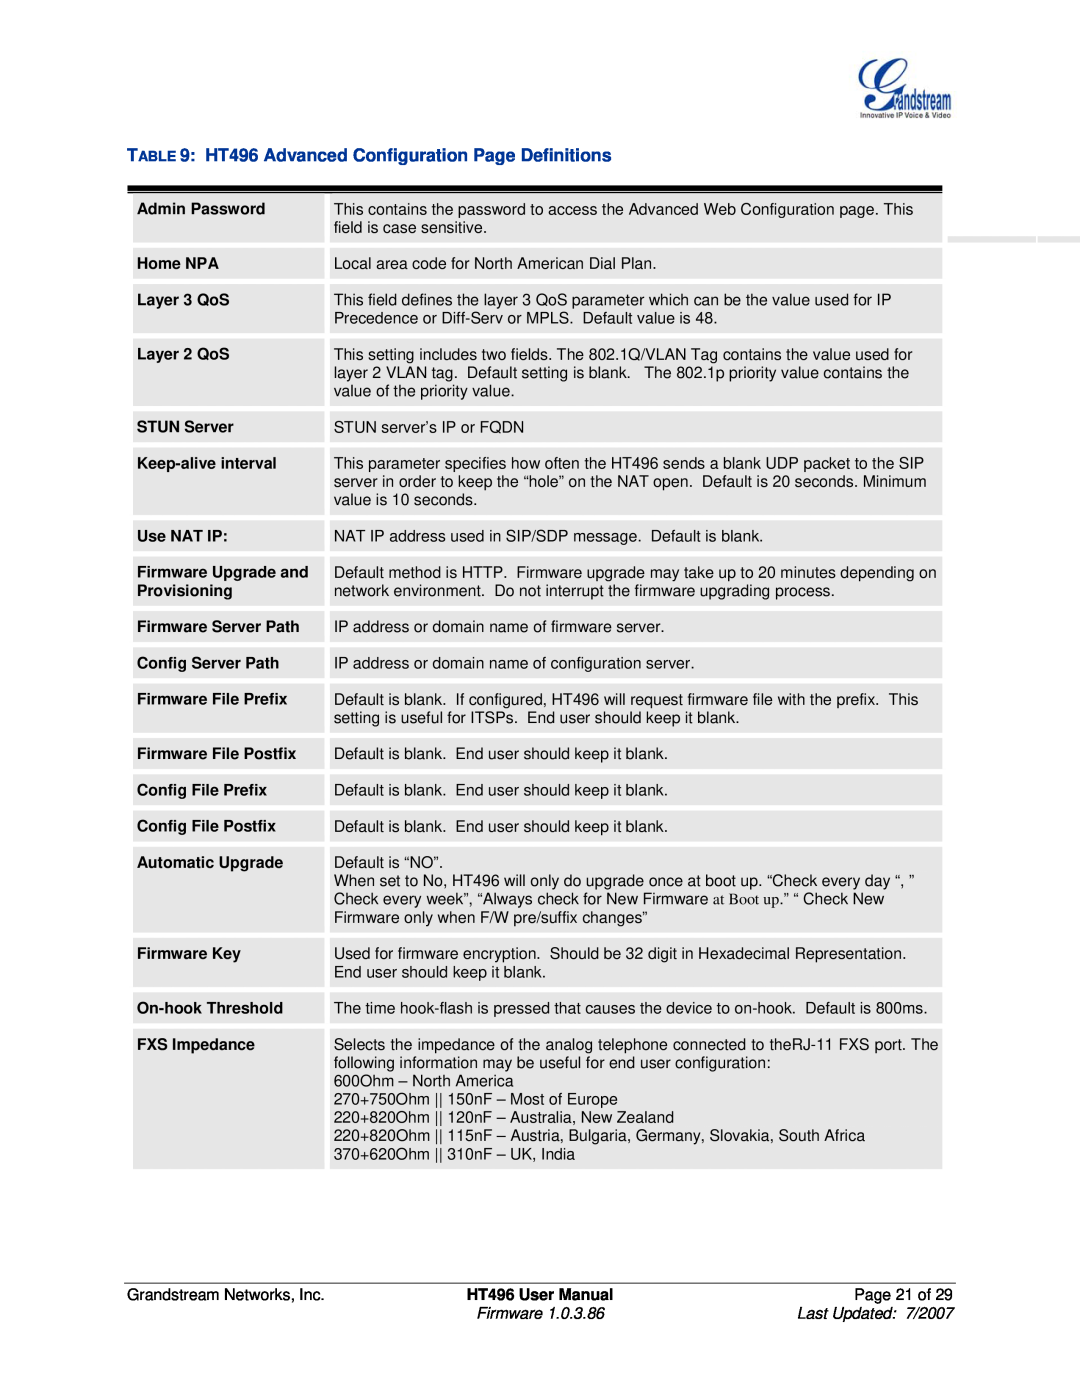 Grandstream Networks user manual HT496 Advanced Configuration Page Definitions 